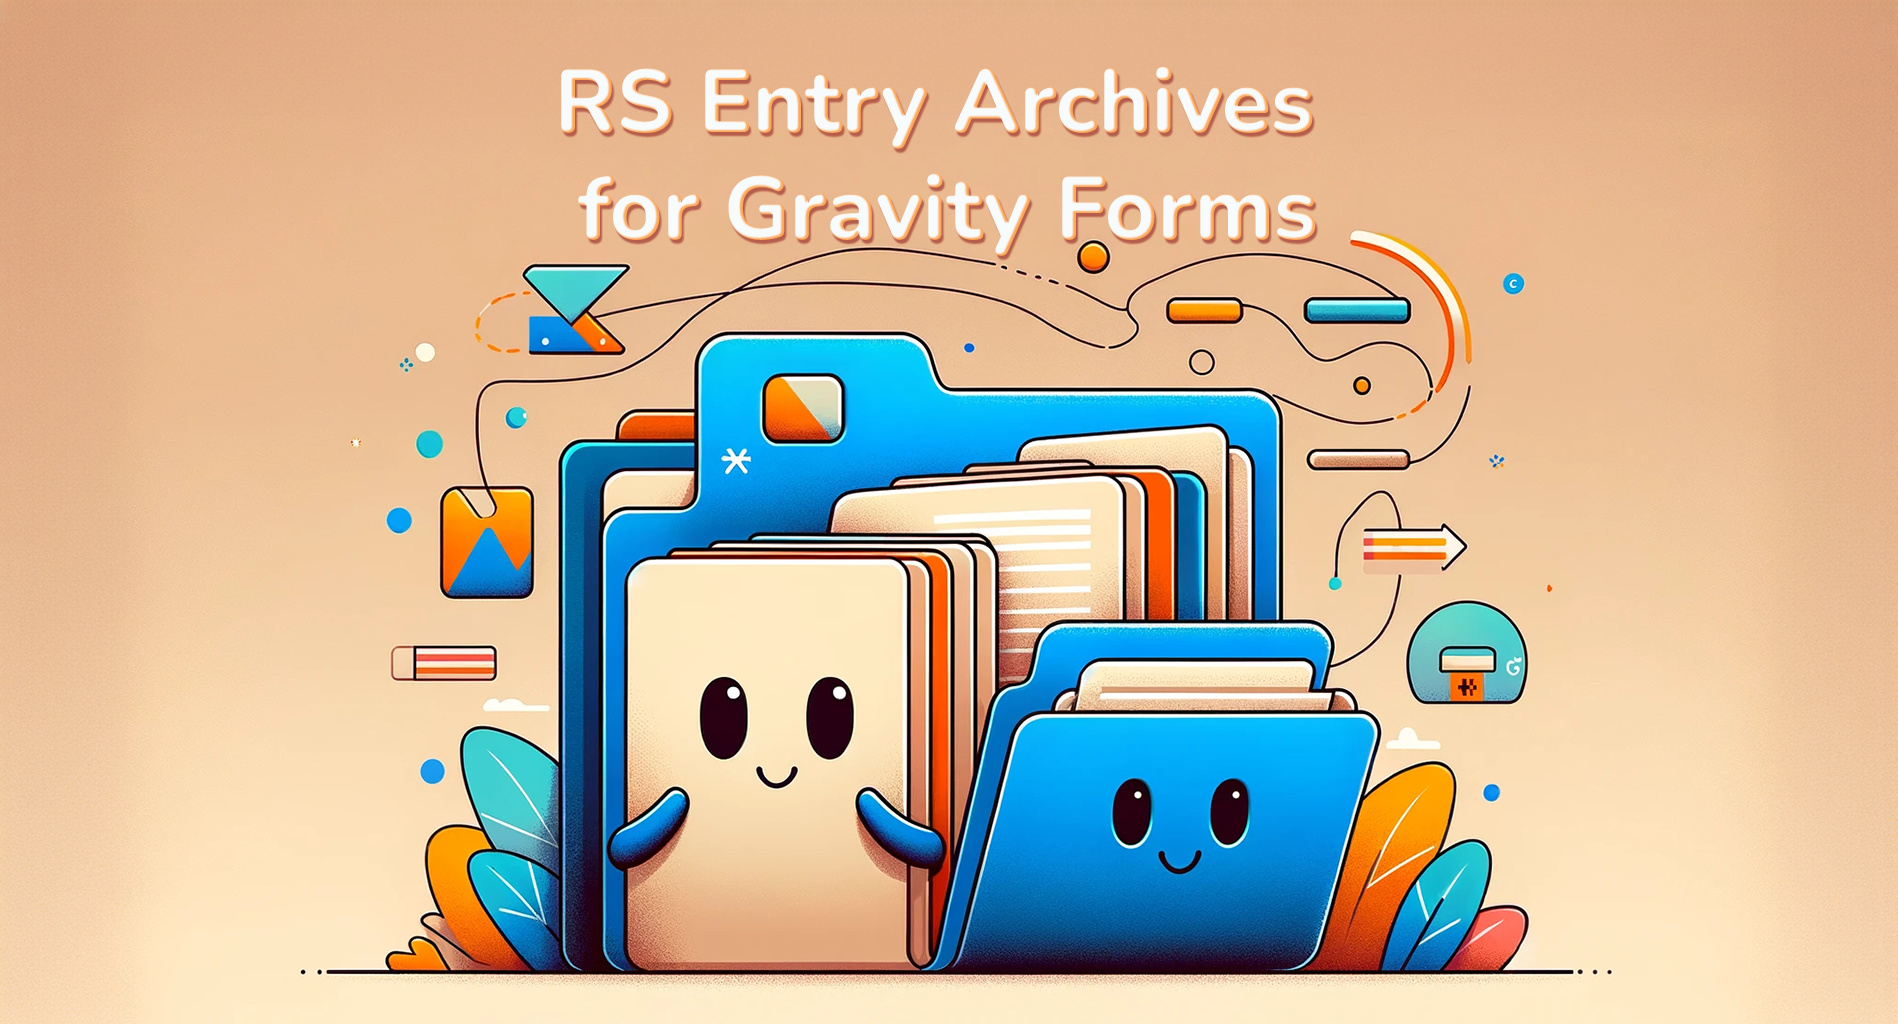 RS Entry Archives for Gravity Forms